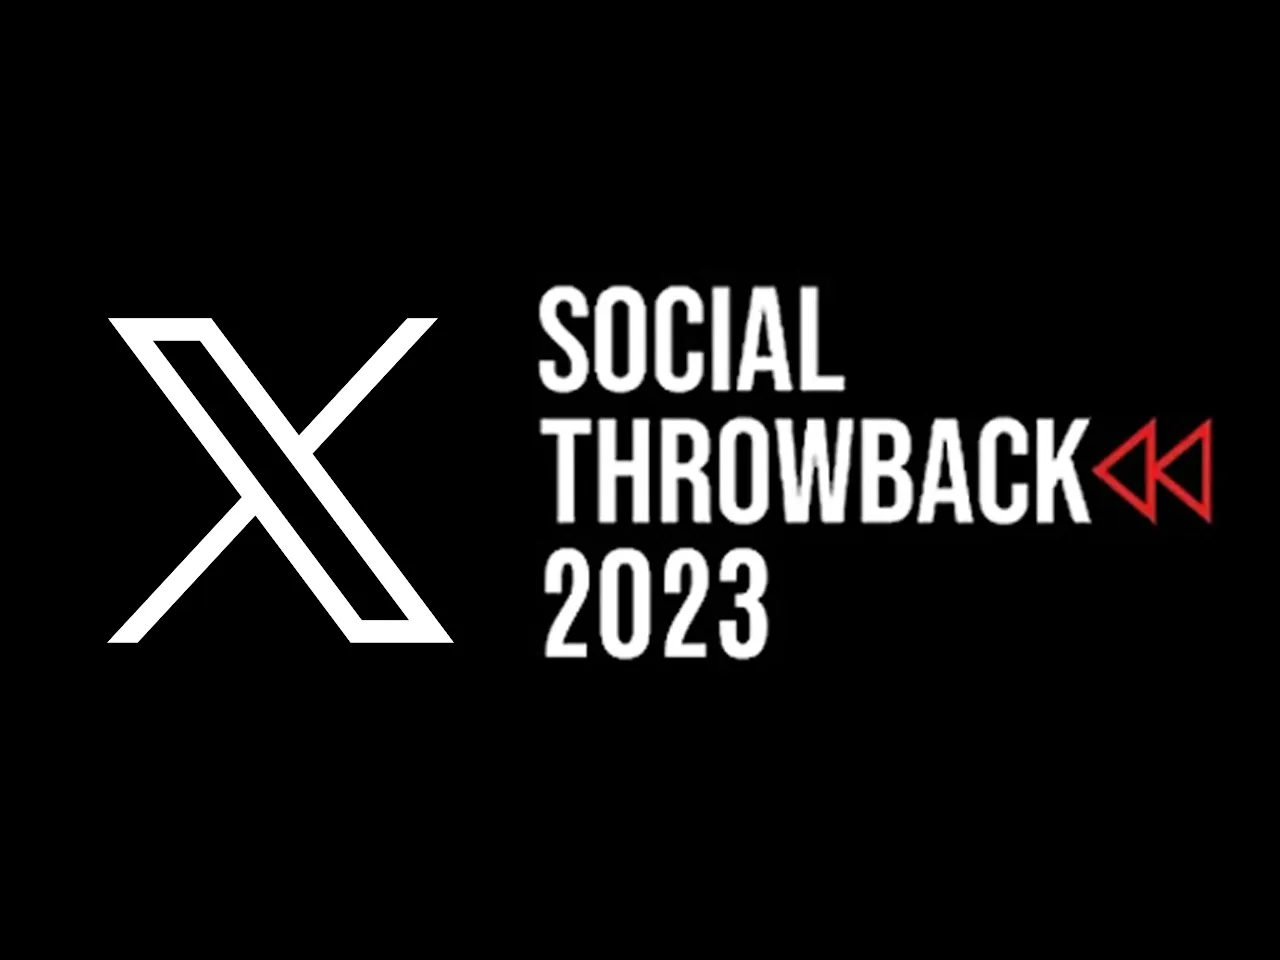 Social Throwback 2023: The year Elon Musk’s X transformed to bring in advertisers